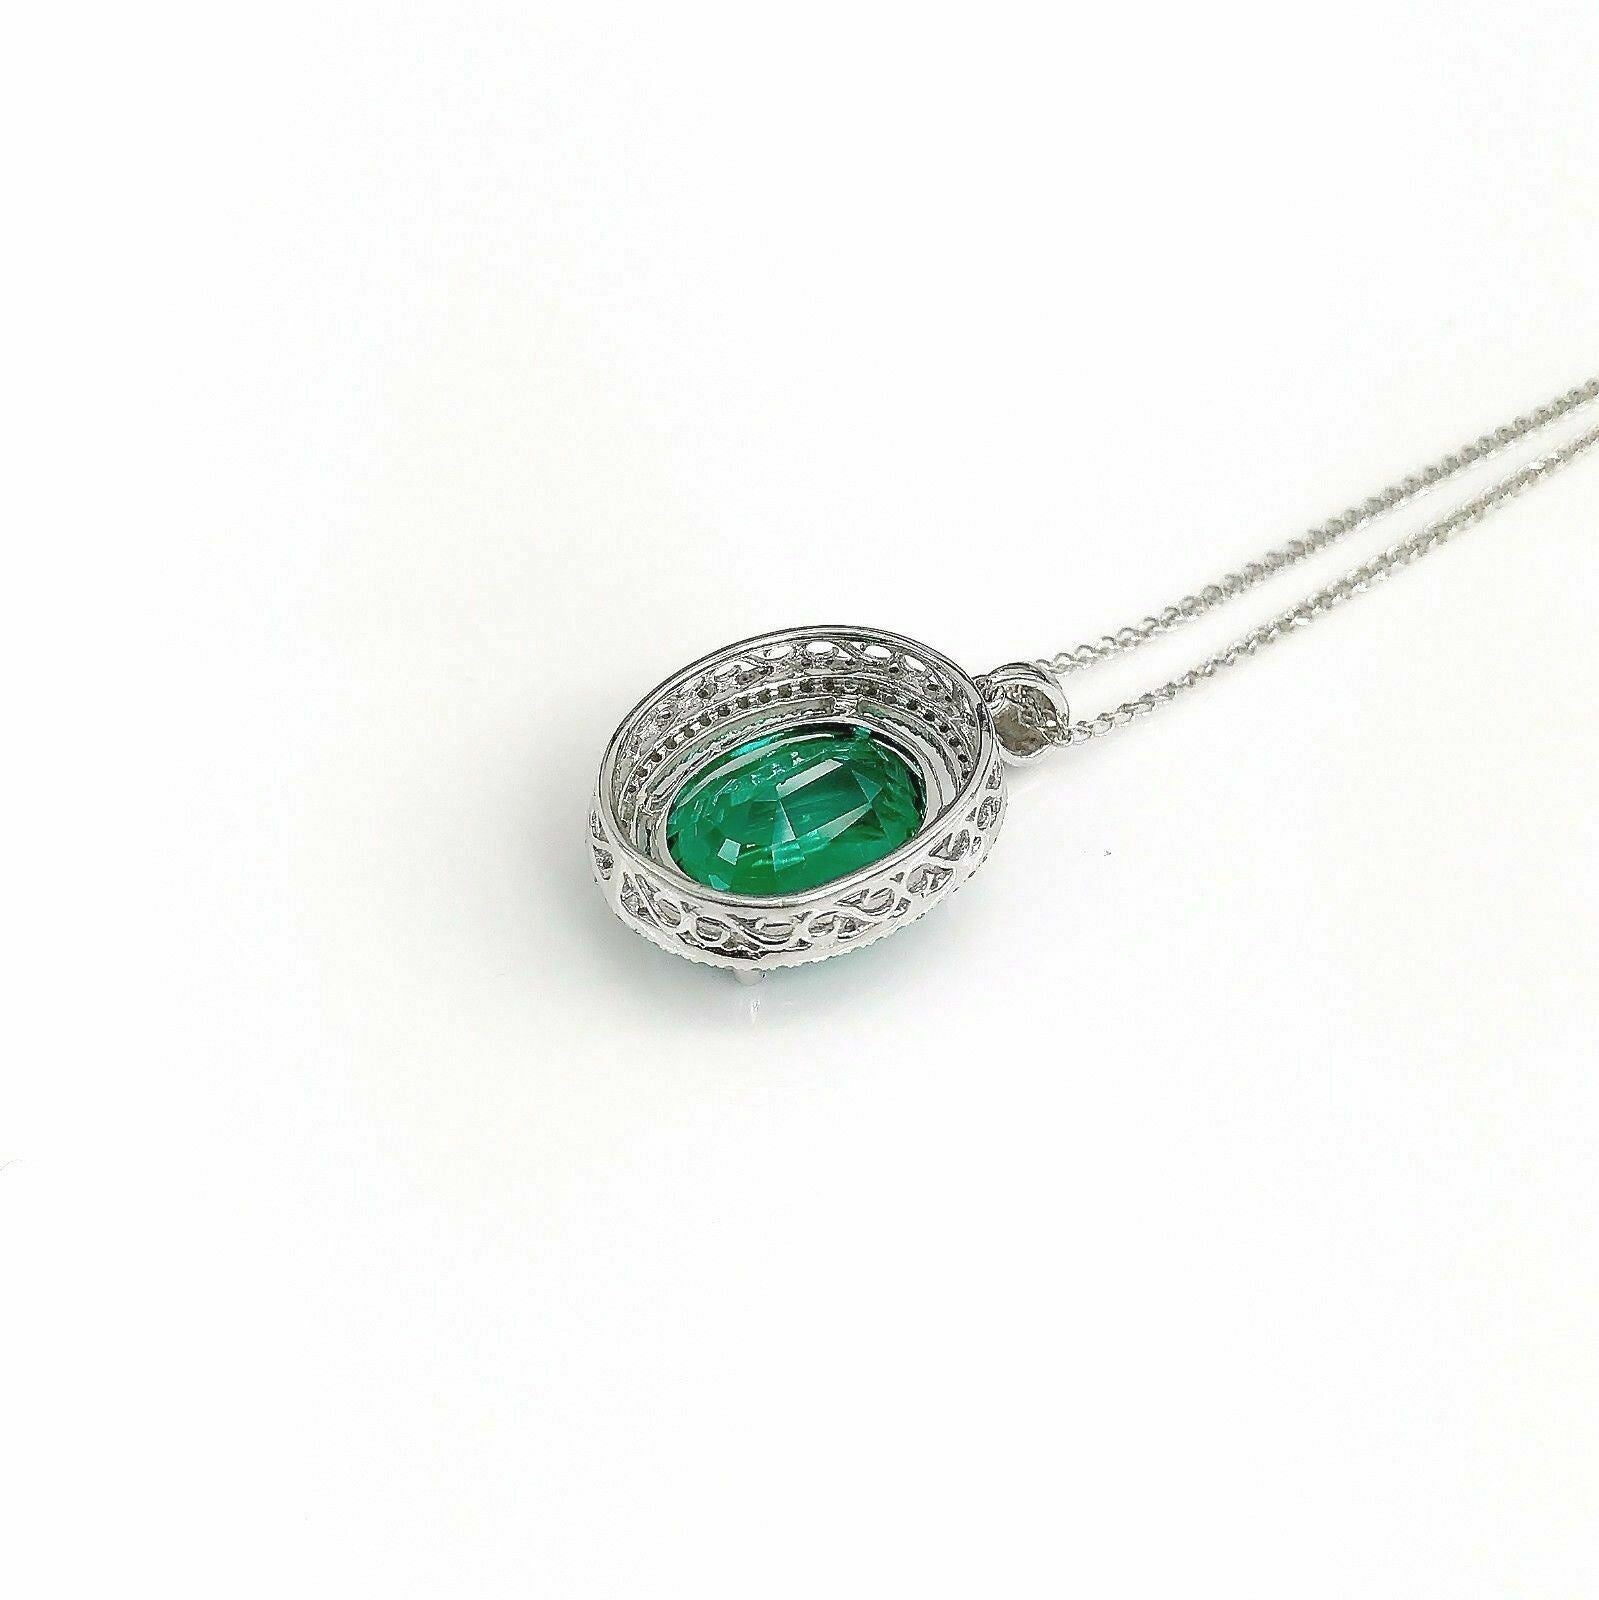 8.38 TCW Natural Oval Green Chatham & Diamond Accents Pendant 14k White Gold